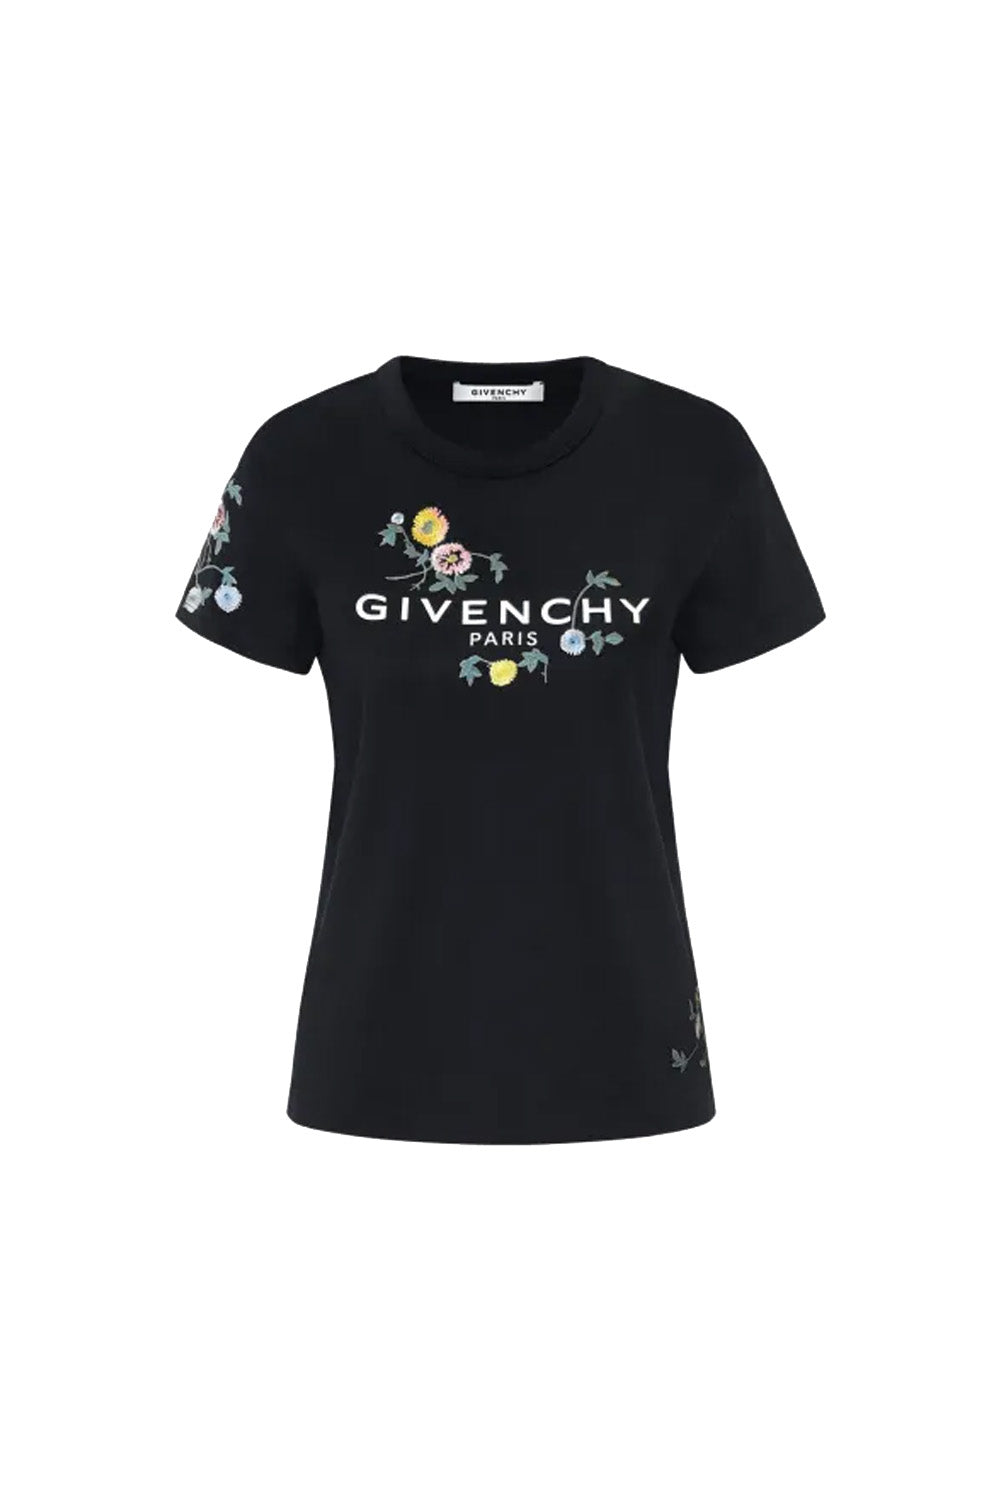 Givenchy logo flowers t-shirt‏